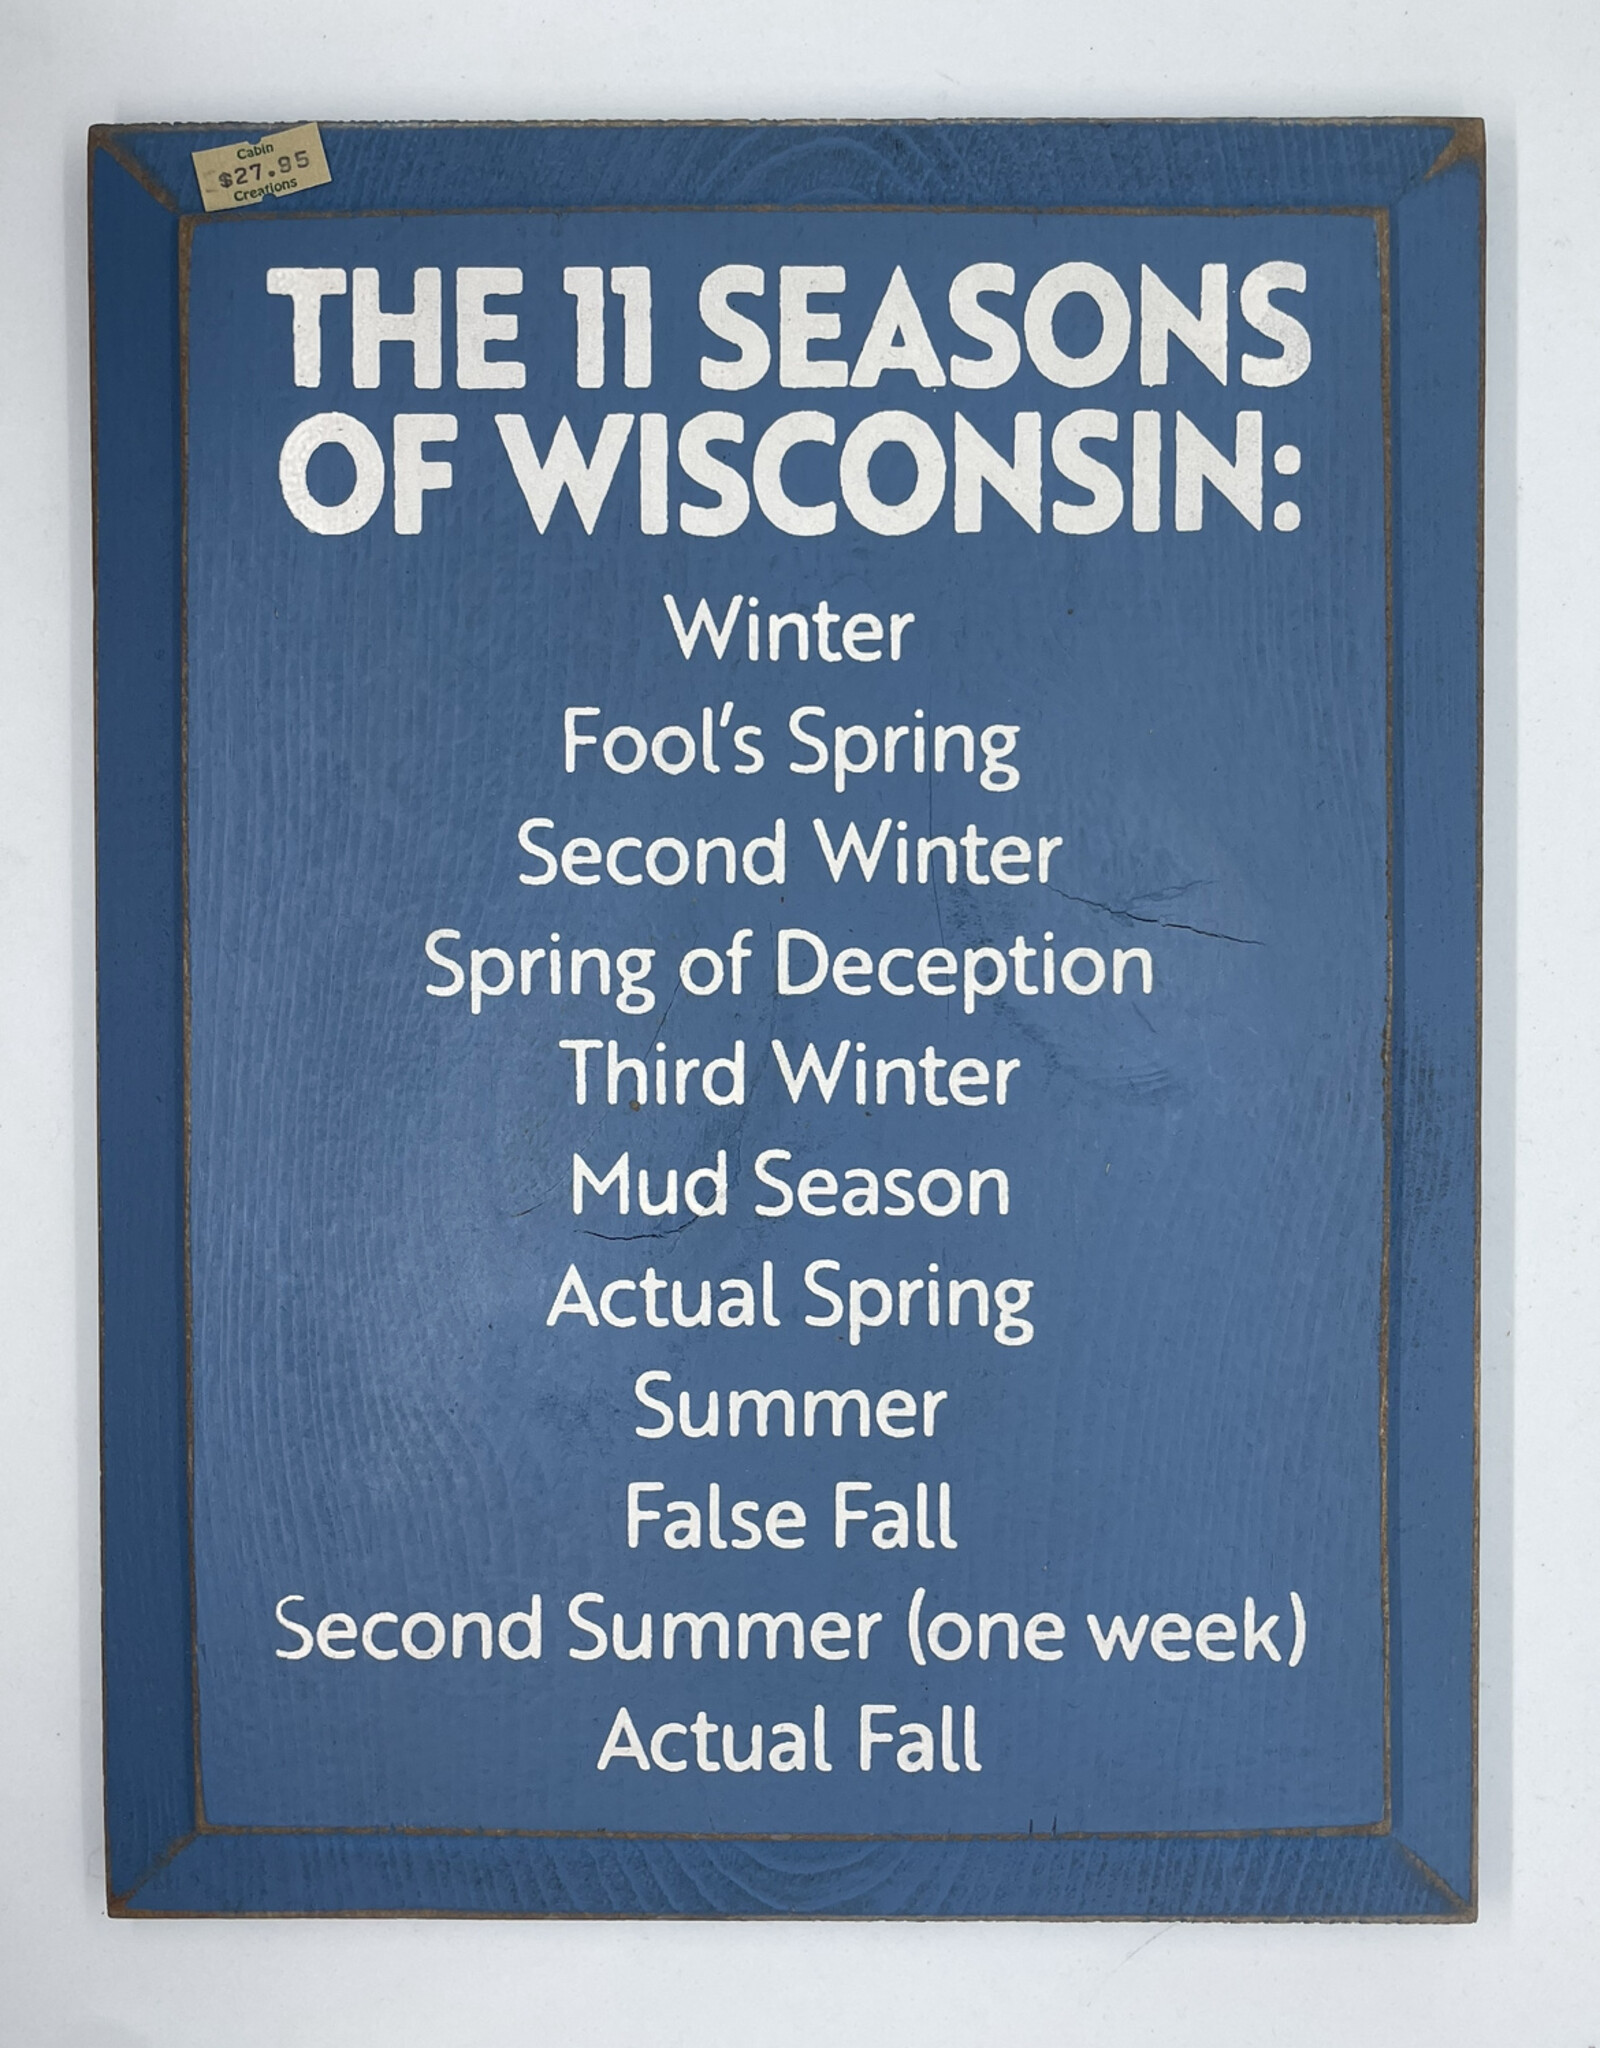 Sawdust City The 11 Seasons of Wisconsin Sign